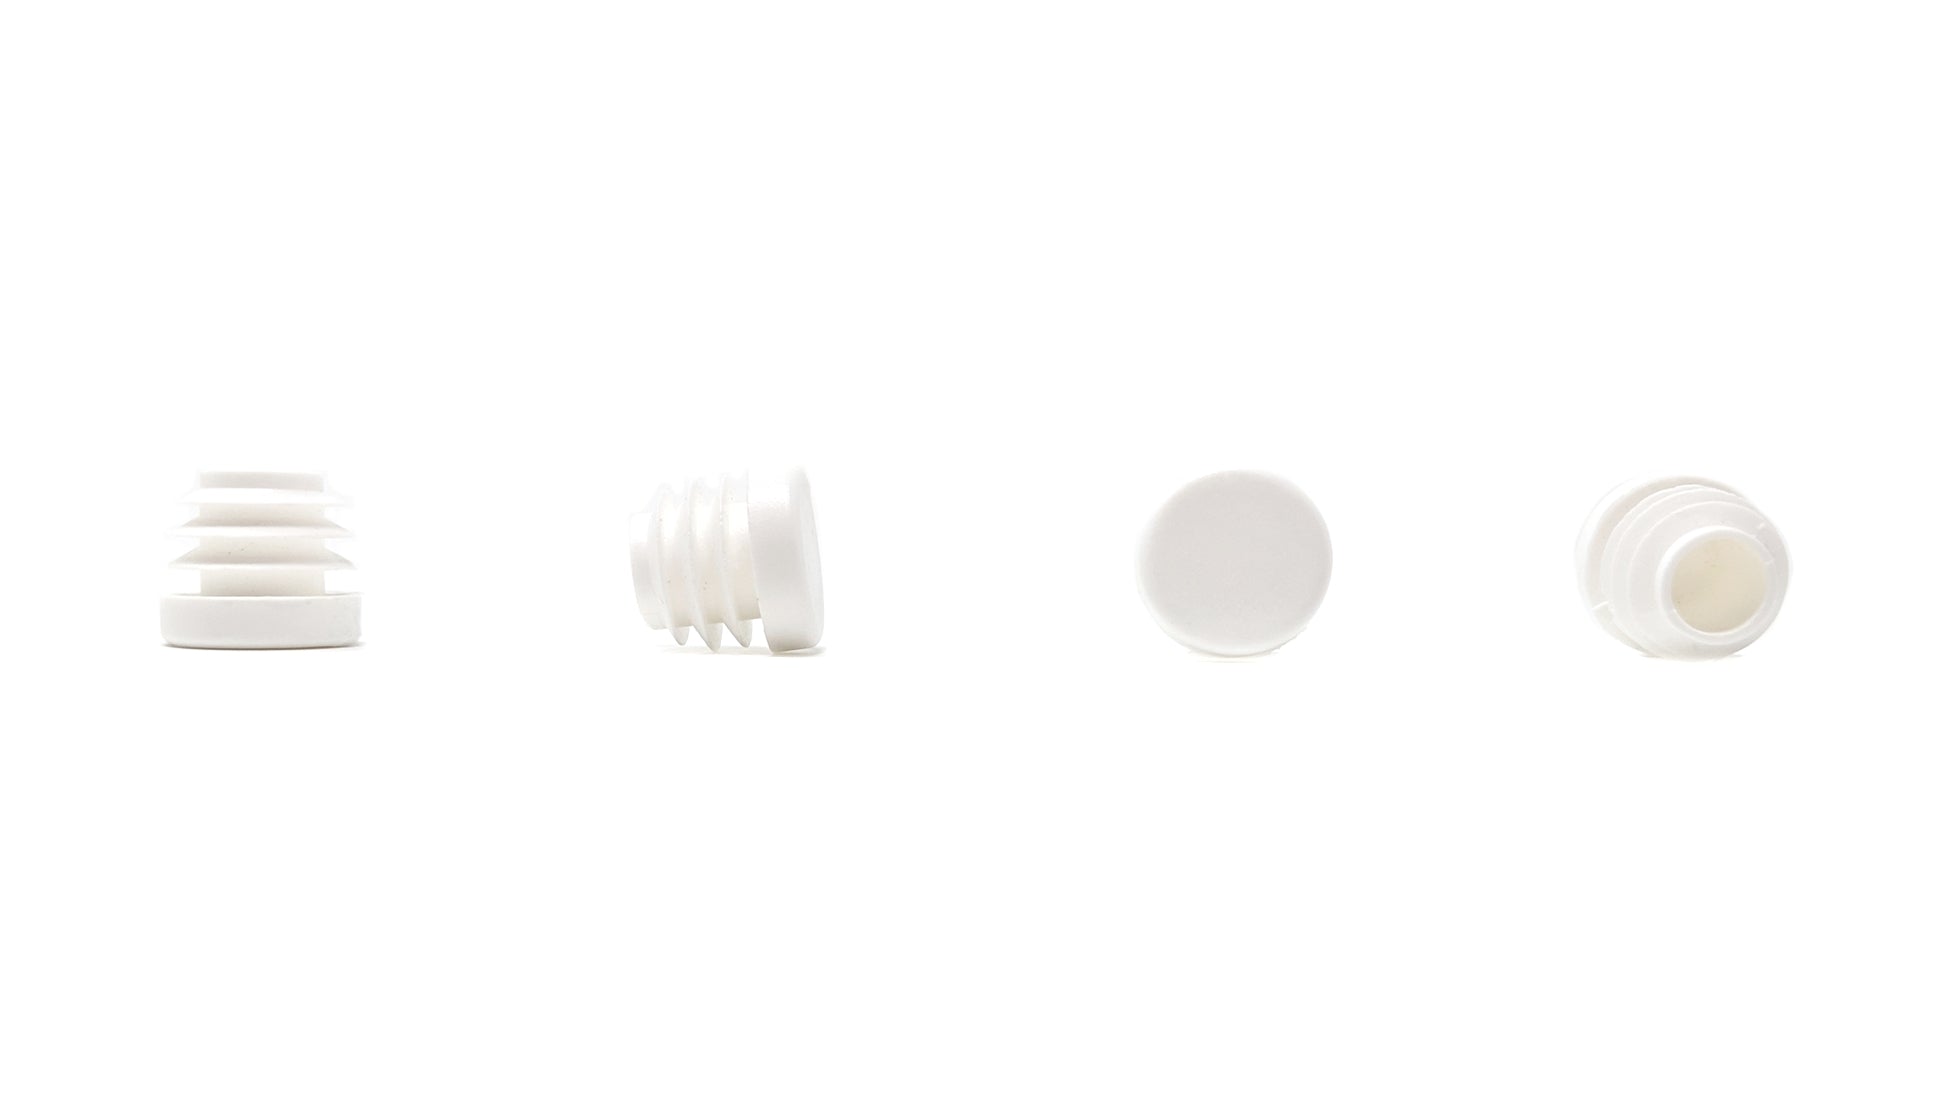 Round Tube Inserts 18mm White | Made in Germany | Keay Vital Parts - Keay Vital Parts